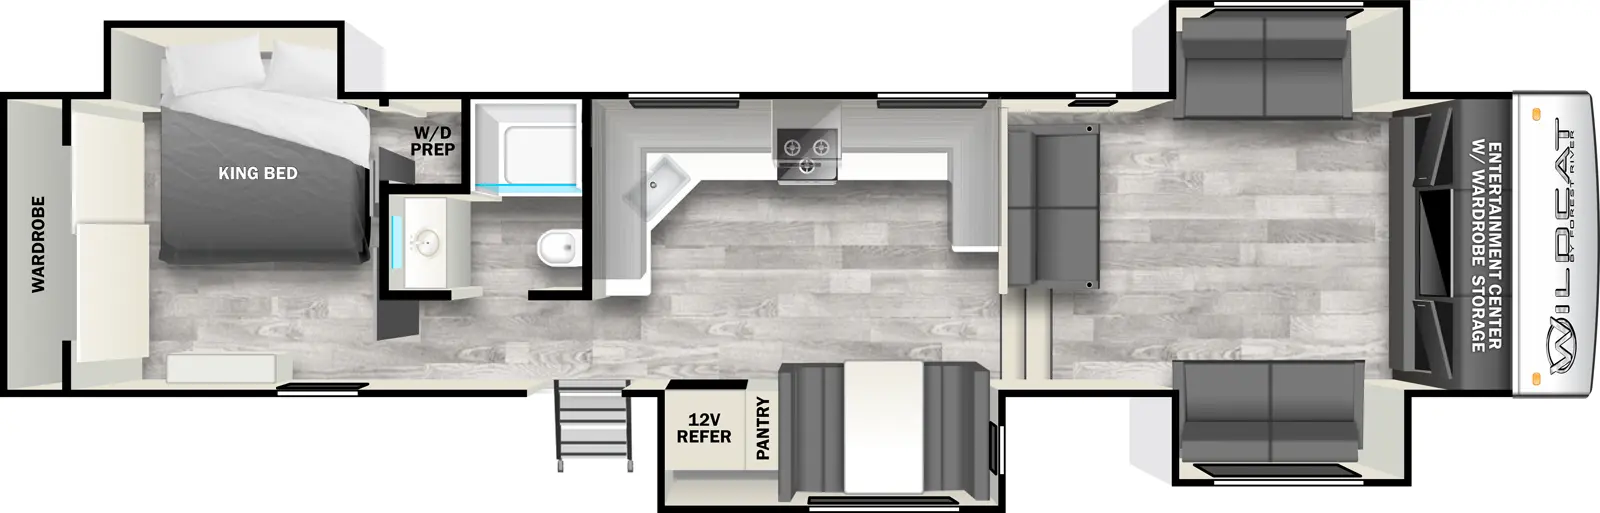 The 35FL has four slideouts and one entry. Interior layout front to back: entertainment center with wardrobe and storage, opposing slideouts with seating, and additional seating across from front entertainment center; steps down to main living area; door side slideout with dinette, pantry, and 12V refrigerator; kitchen counter wraps from inner wall to off-door side with cooktop and overhead cabinets, and continues to wrap to other inner wall with sink; door side entry; off-door side full bathroom; rear bedroom with off-door side closet with washer/dryer prep, and king bed slideout, and rear wardrobe.